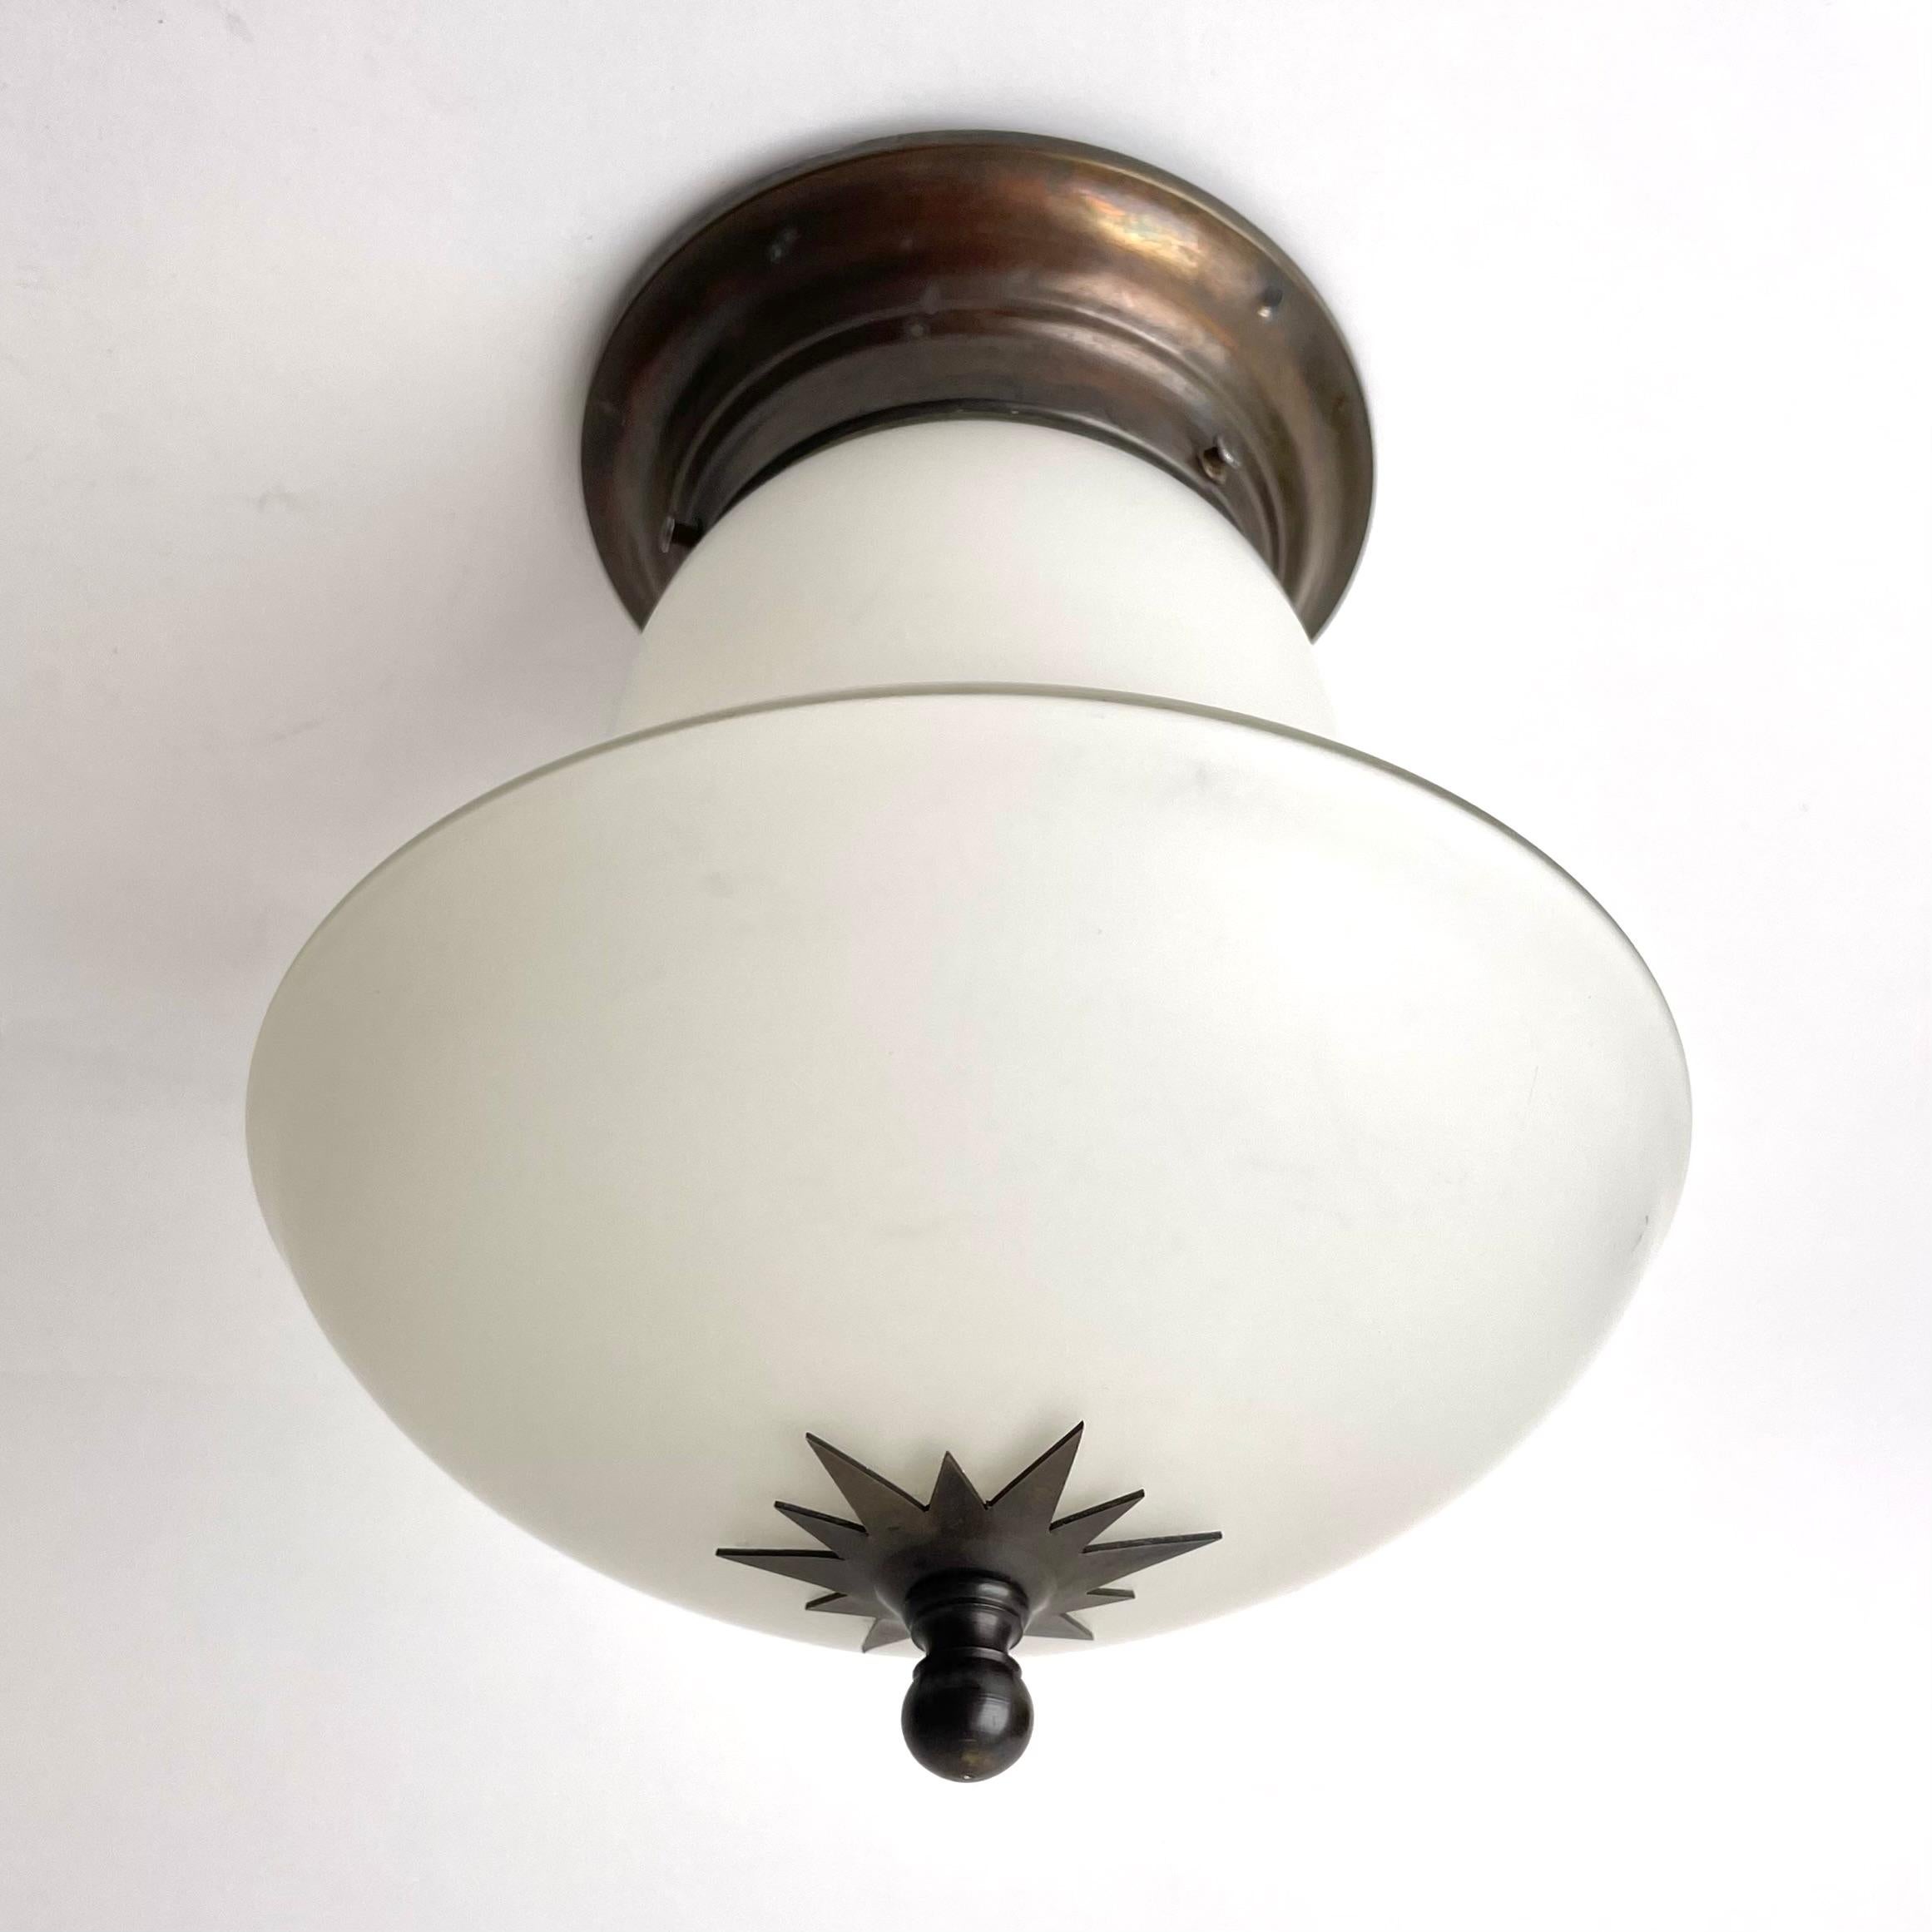 An elegant flush mount ceiling lamp made during the 1920s in Sweden in the refined Swedish Grace style, known for its refined interpretation of stylized classicism, while reflecting modern sensibilities in terms of materials and form. It consists of